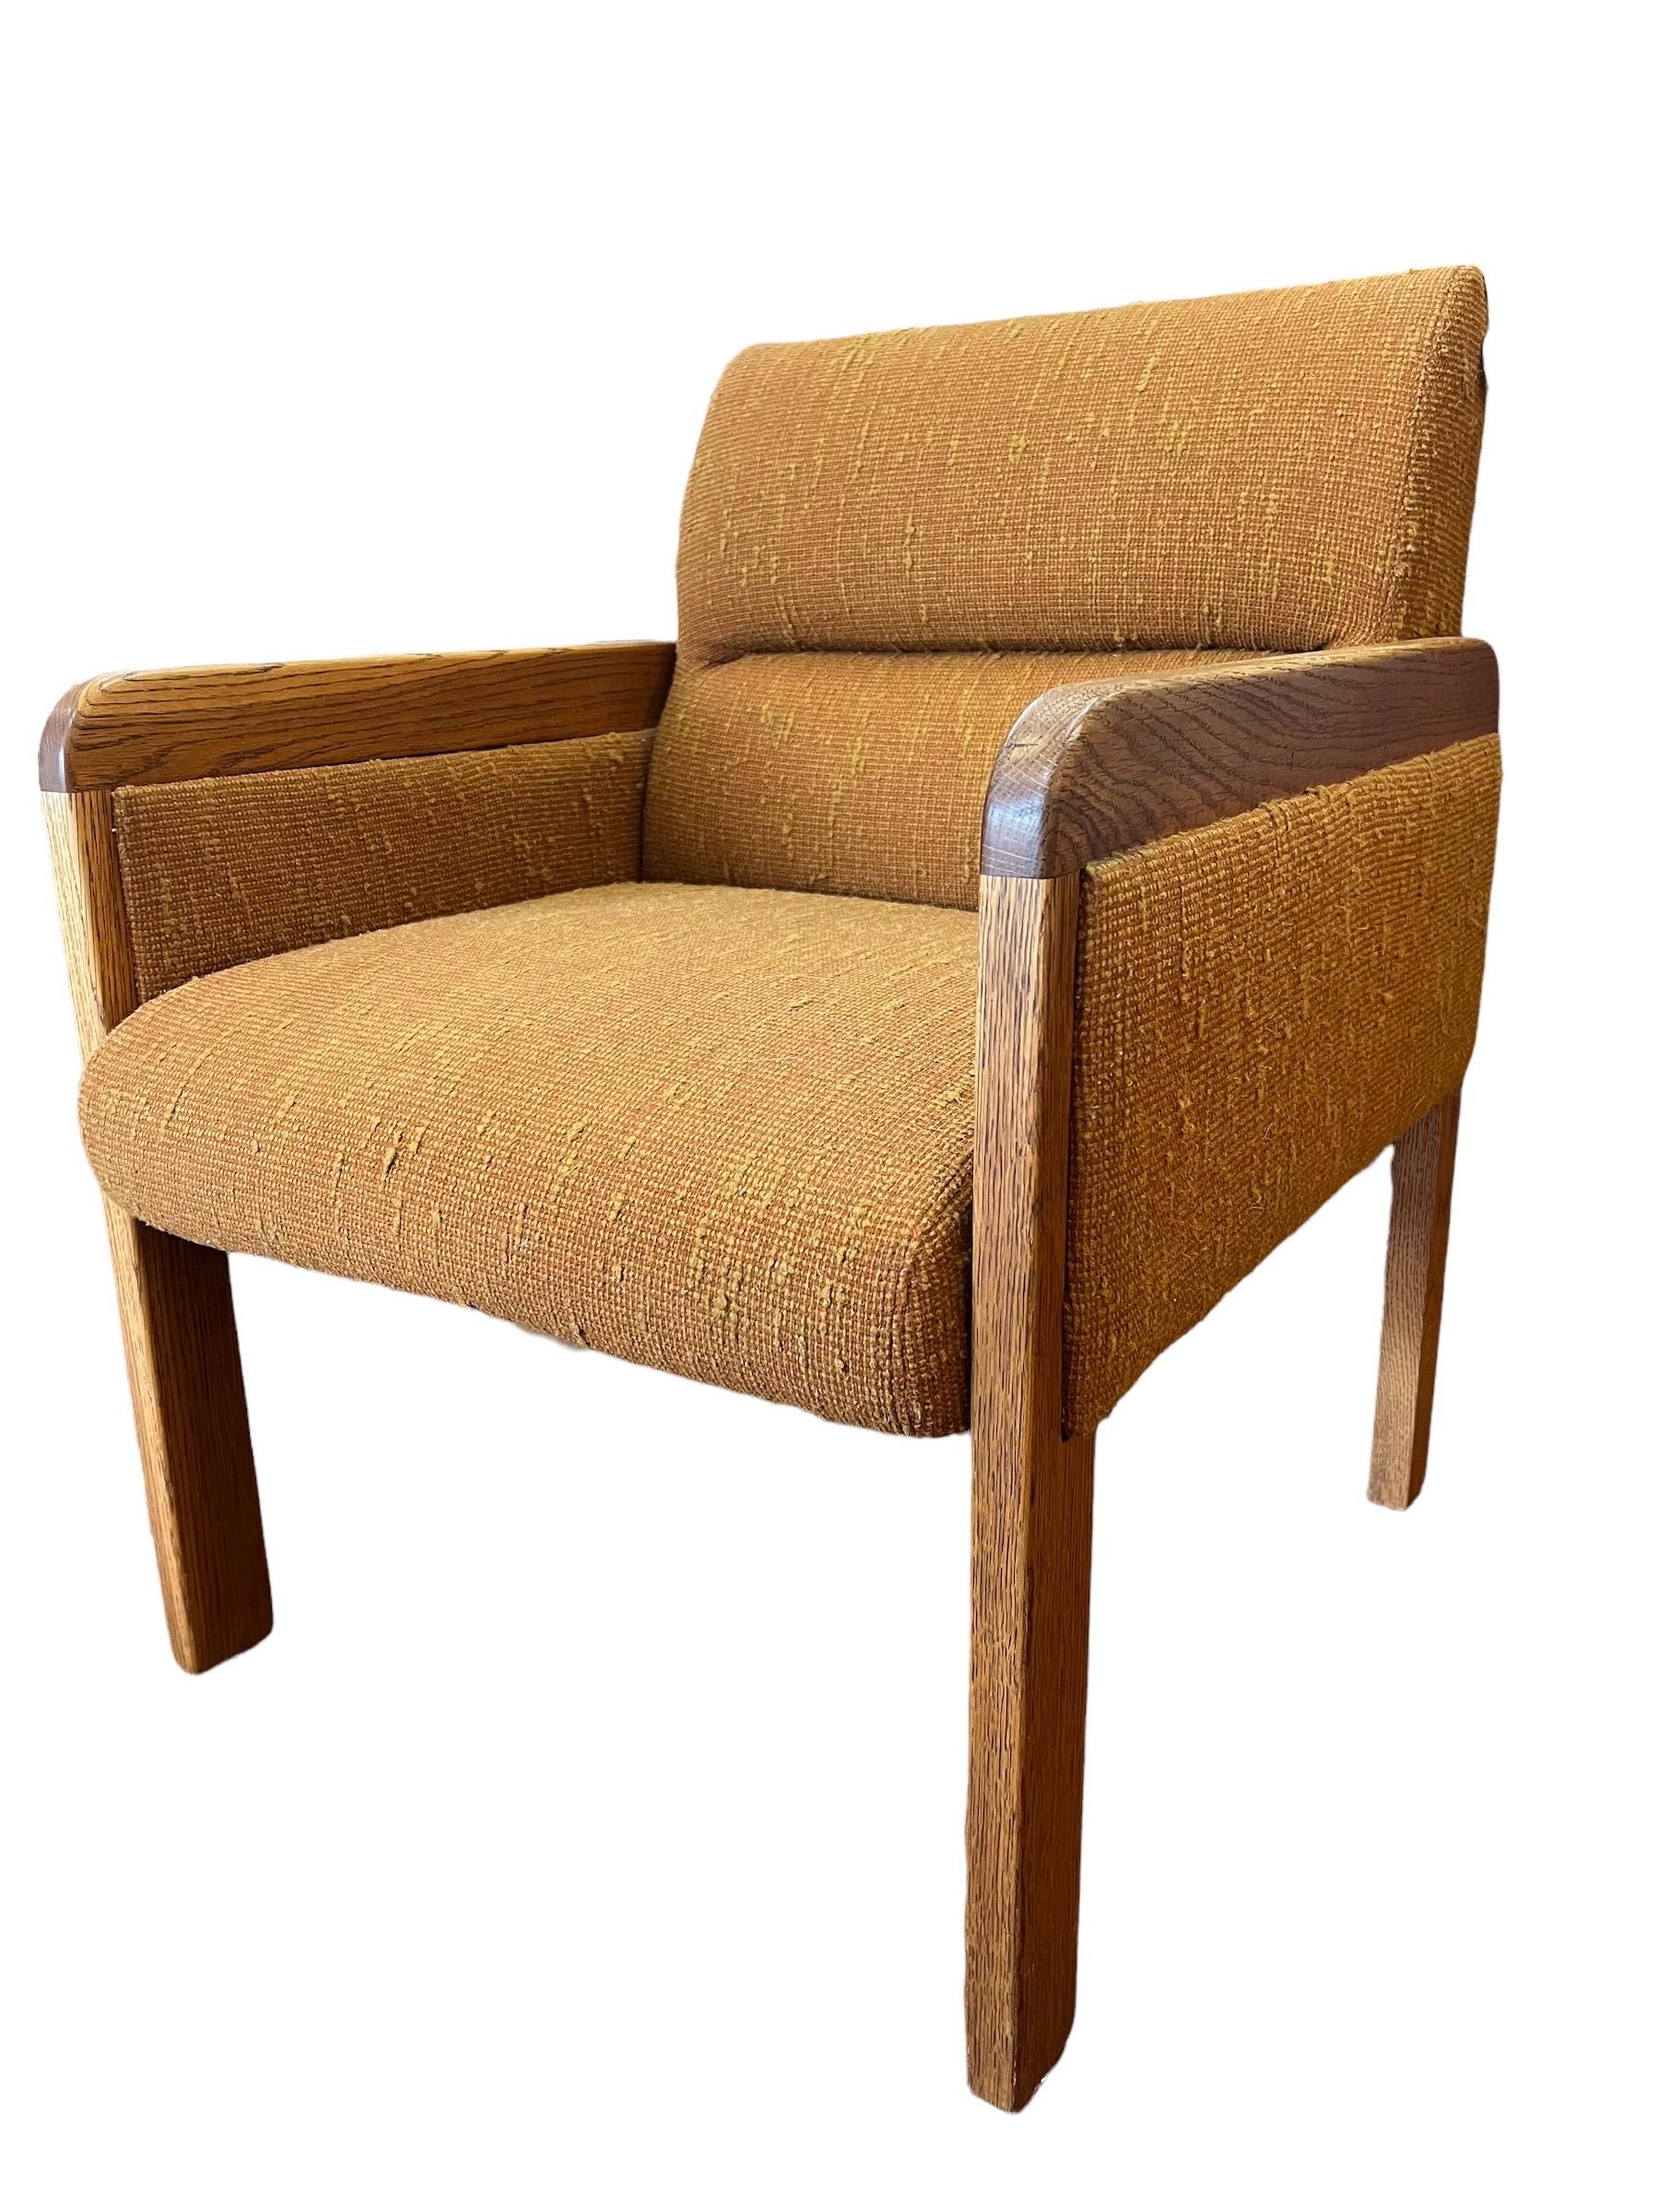 Mid-20th Century Vintage Solid Oak Upholstered Mid-Century Modern Sofa Chair For Sale